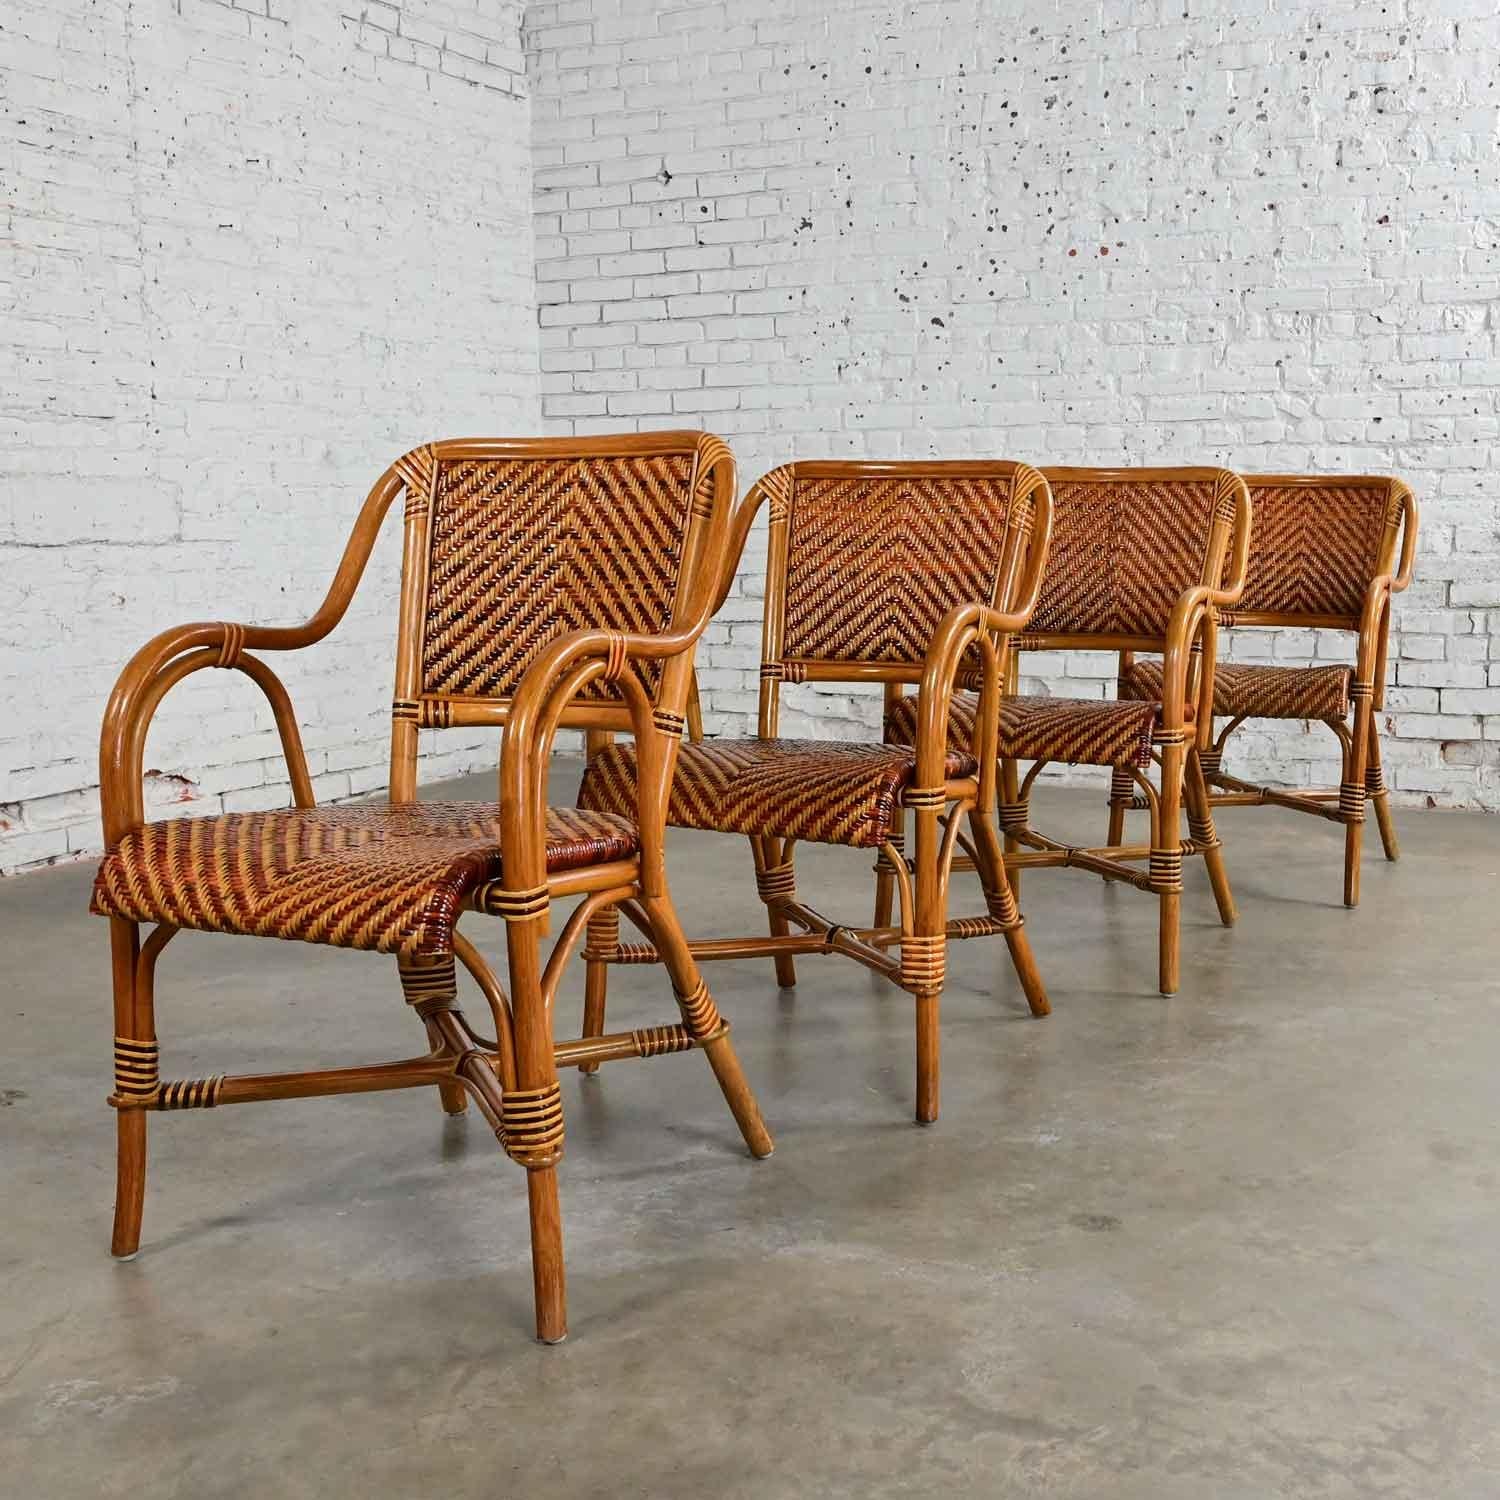 Boho Chic 2 Toned Wicker Rattan Café Bistro or Conservatory Armchairs Set of 4 5